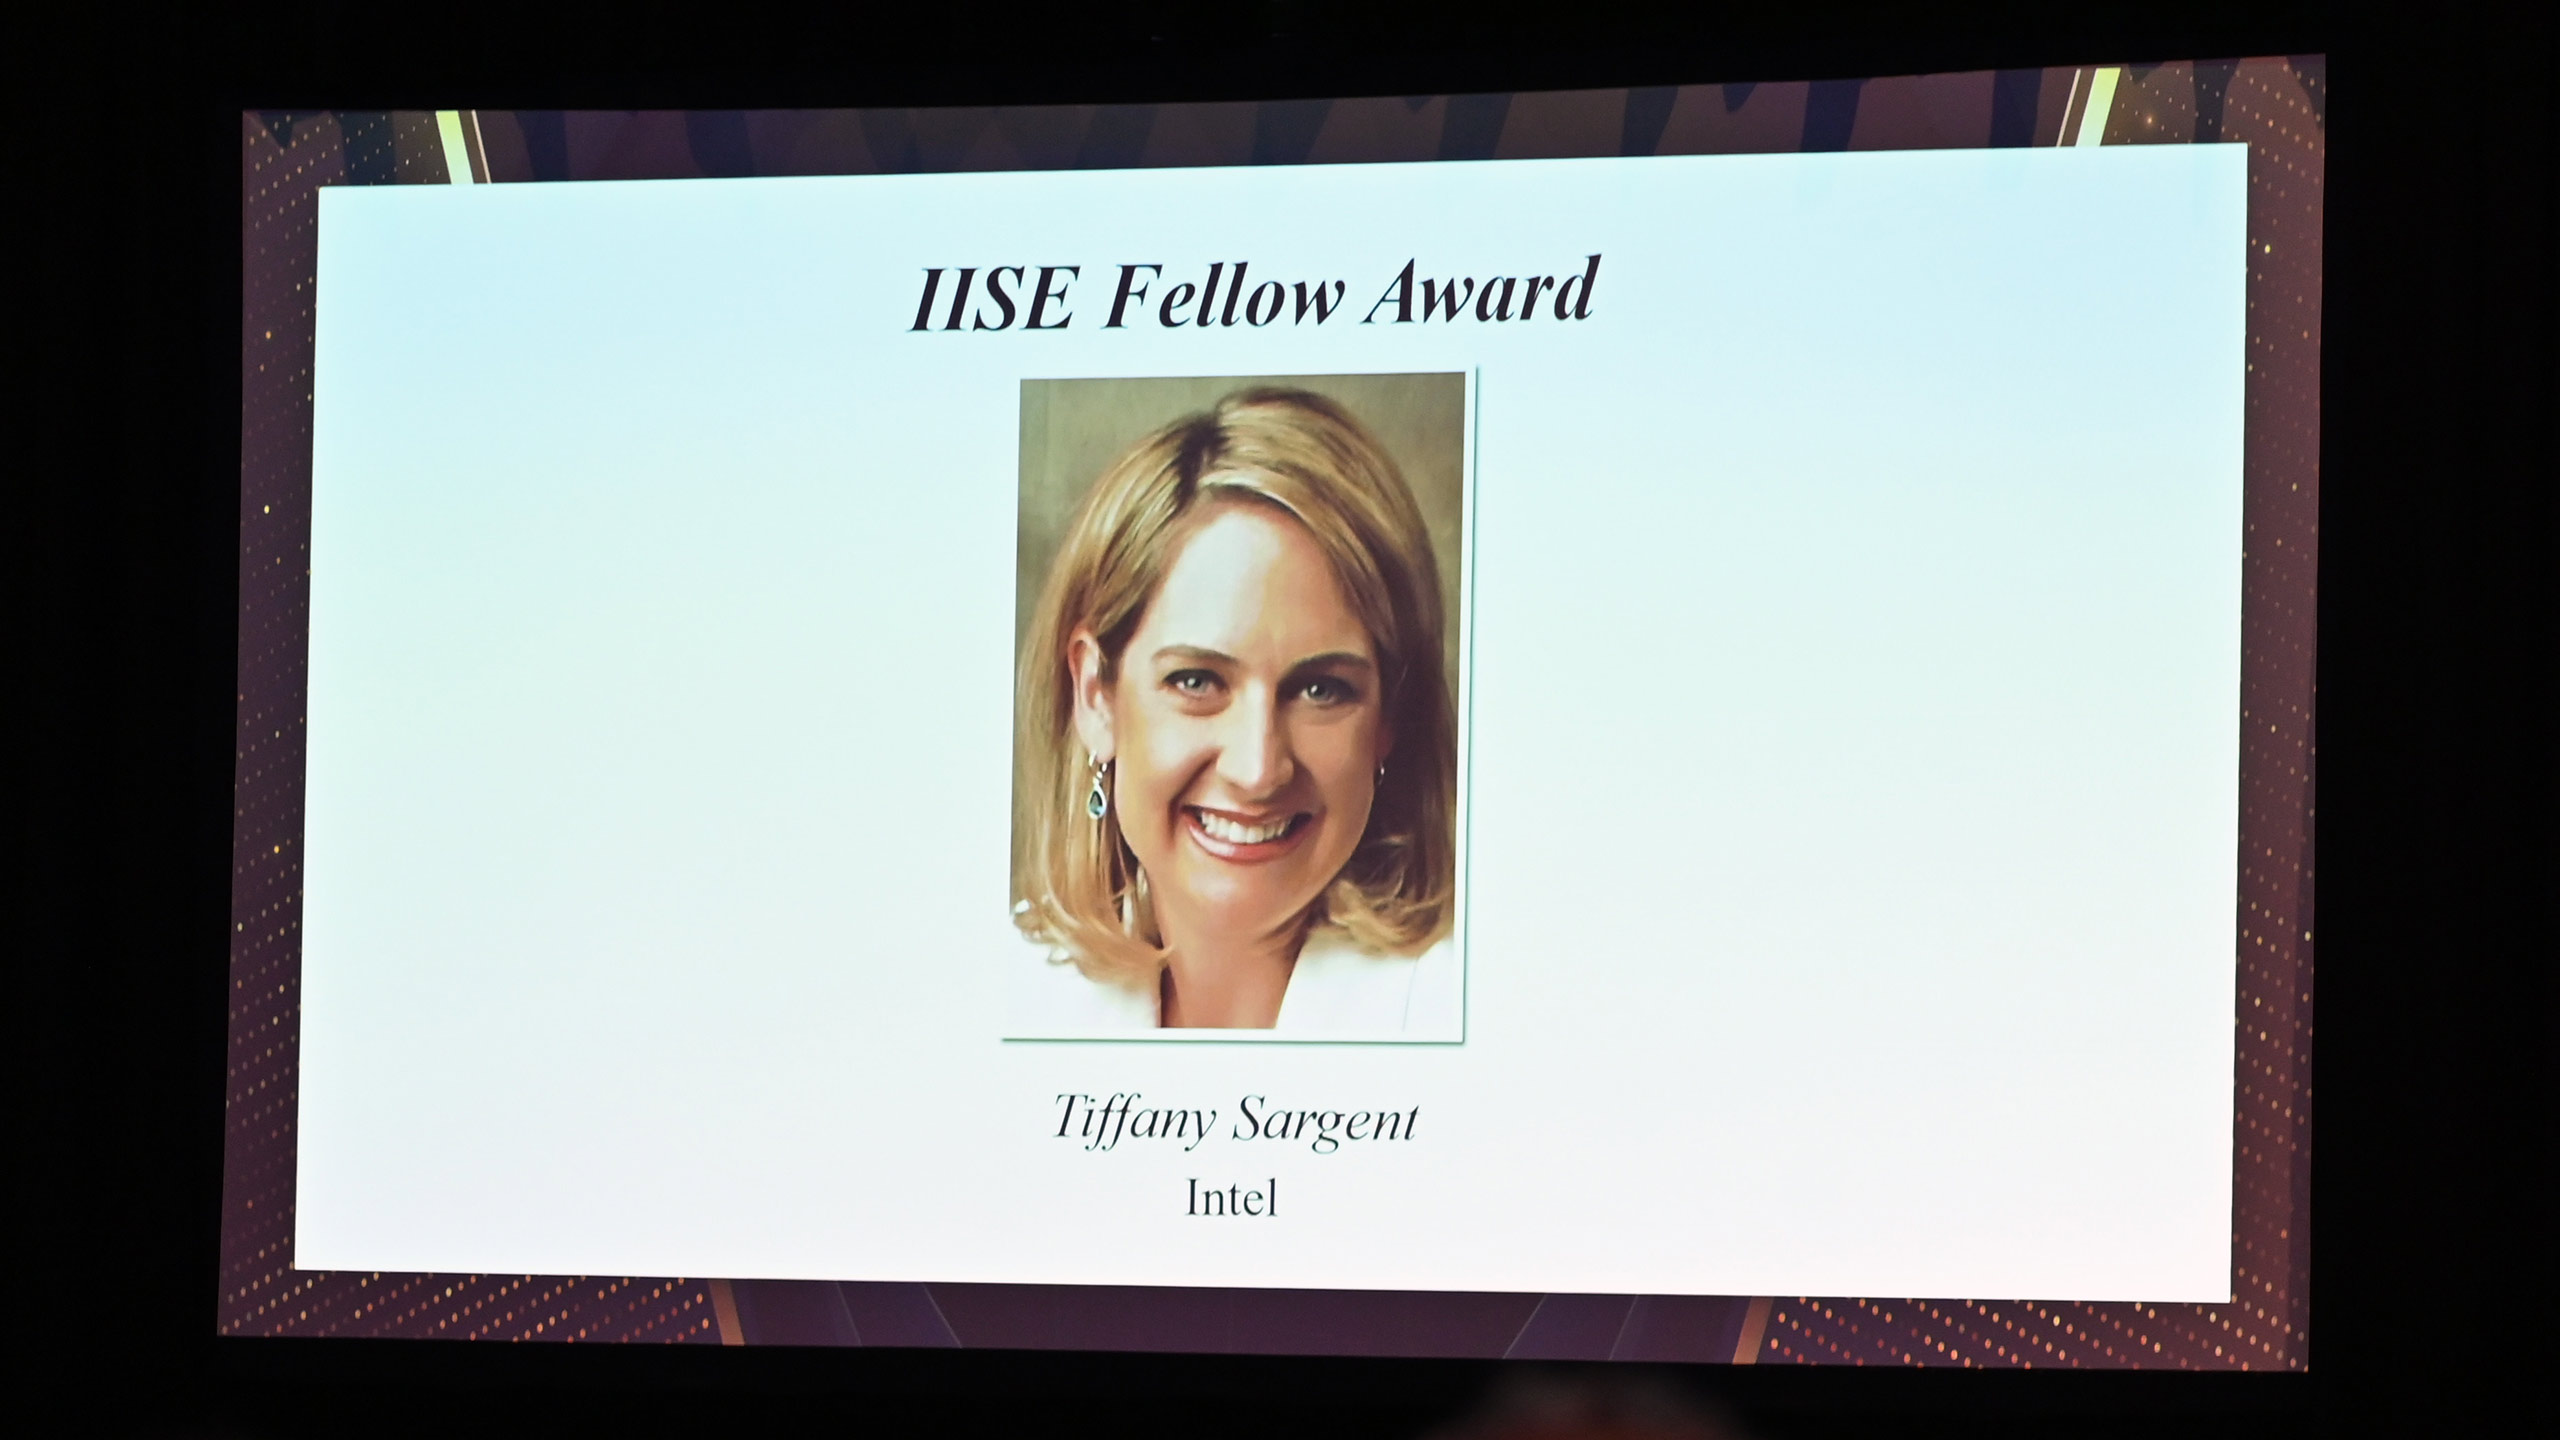 Tiffany Sargent wins an IISE Fellows Award for her work in industrial and systems engineering